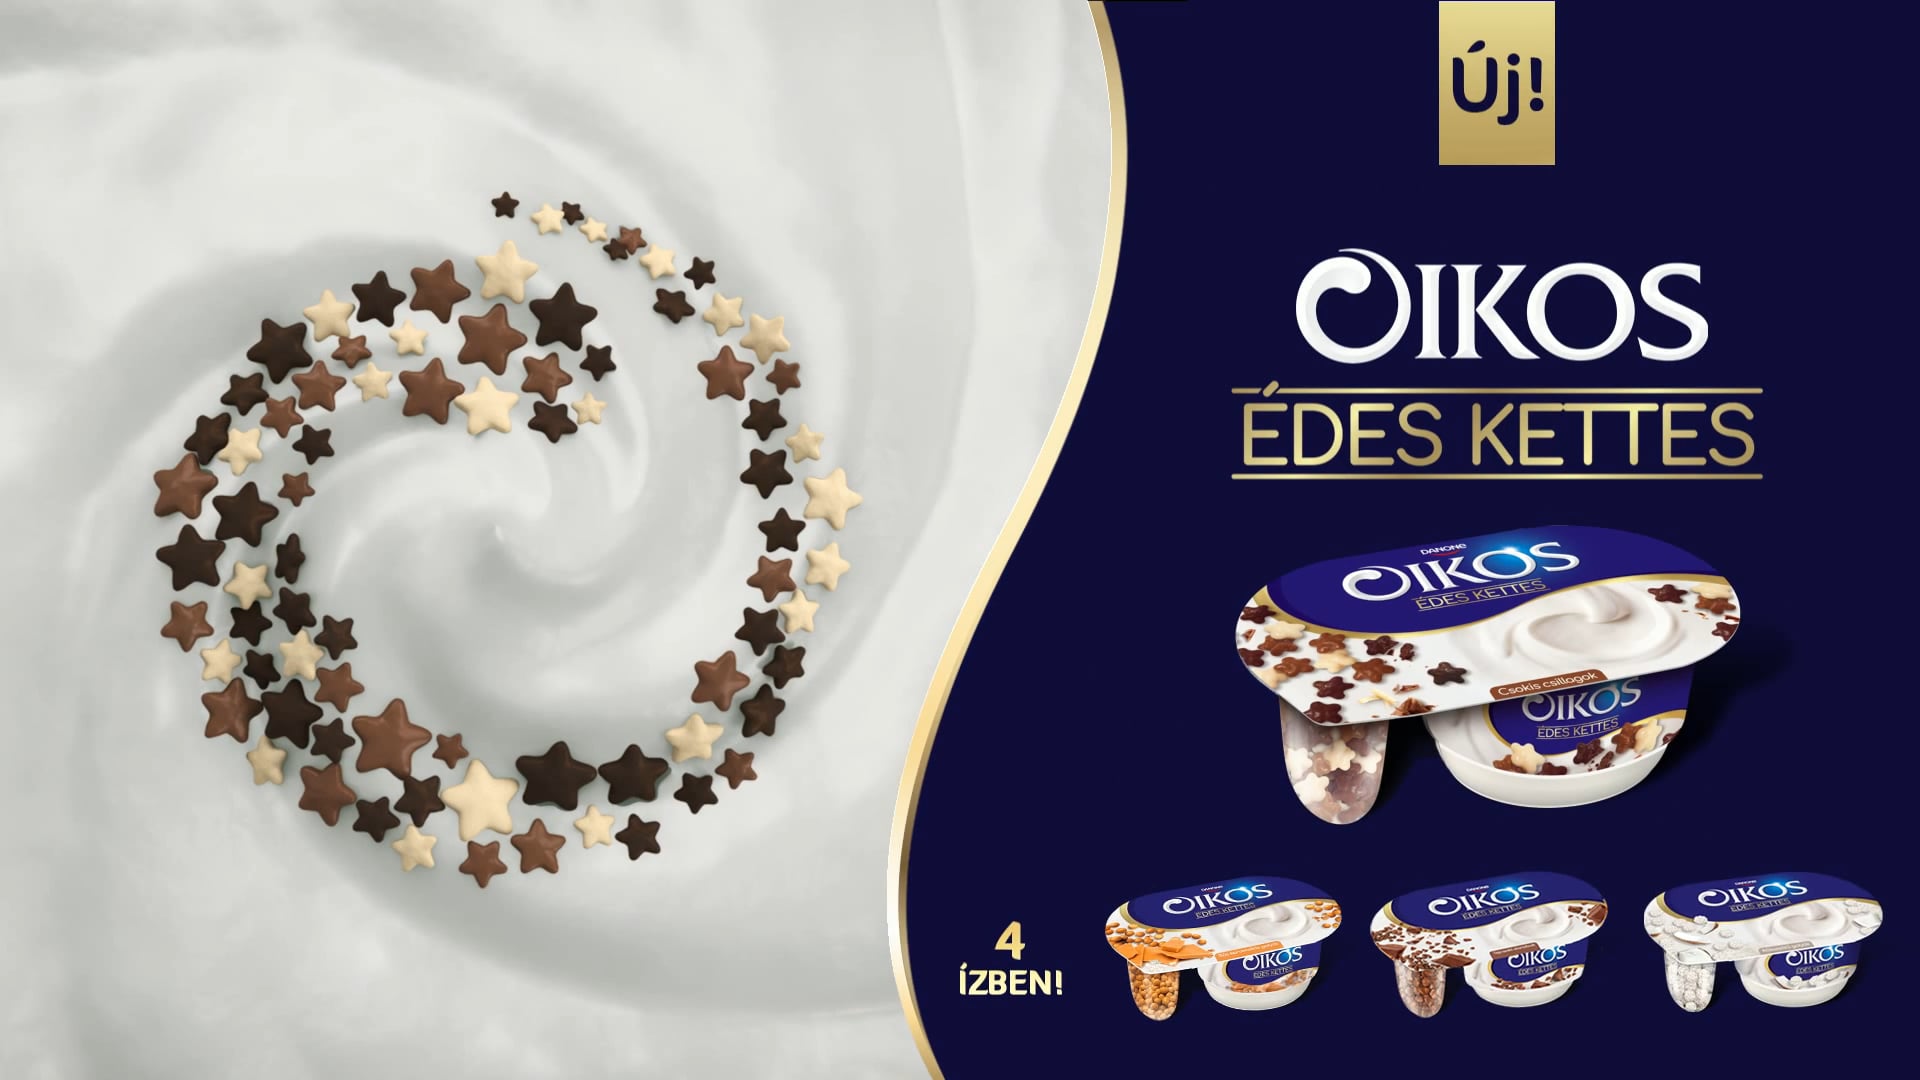 Danone Oikos Édes Kettes - product launch TVC